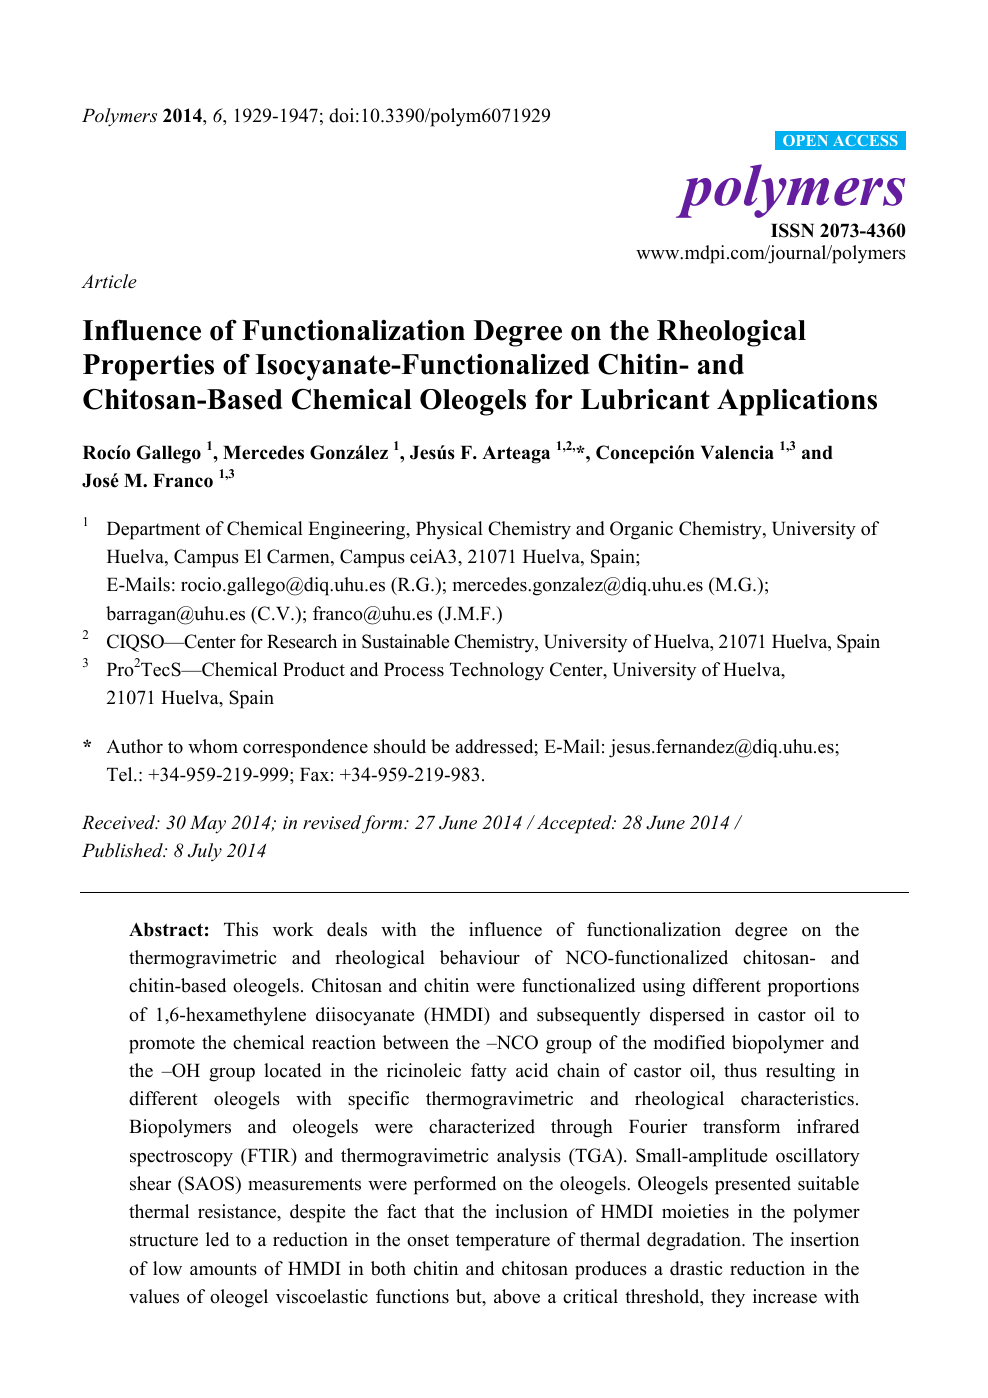 Influence Of Functionalization Degree On The Rheological Properties Of Isocyanate Functionalized Chitin And Chitosan Based Chemical Oleogels For Lubricant Applications Topic Of Research Paper In Chemical Engineering Download Scholarly Article Pdf